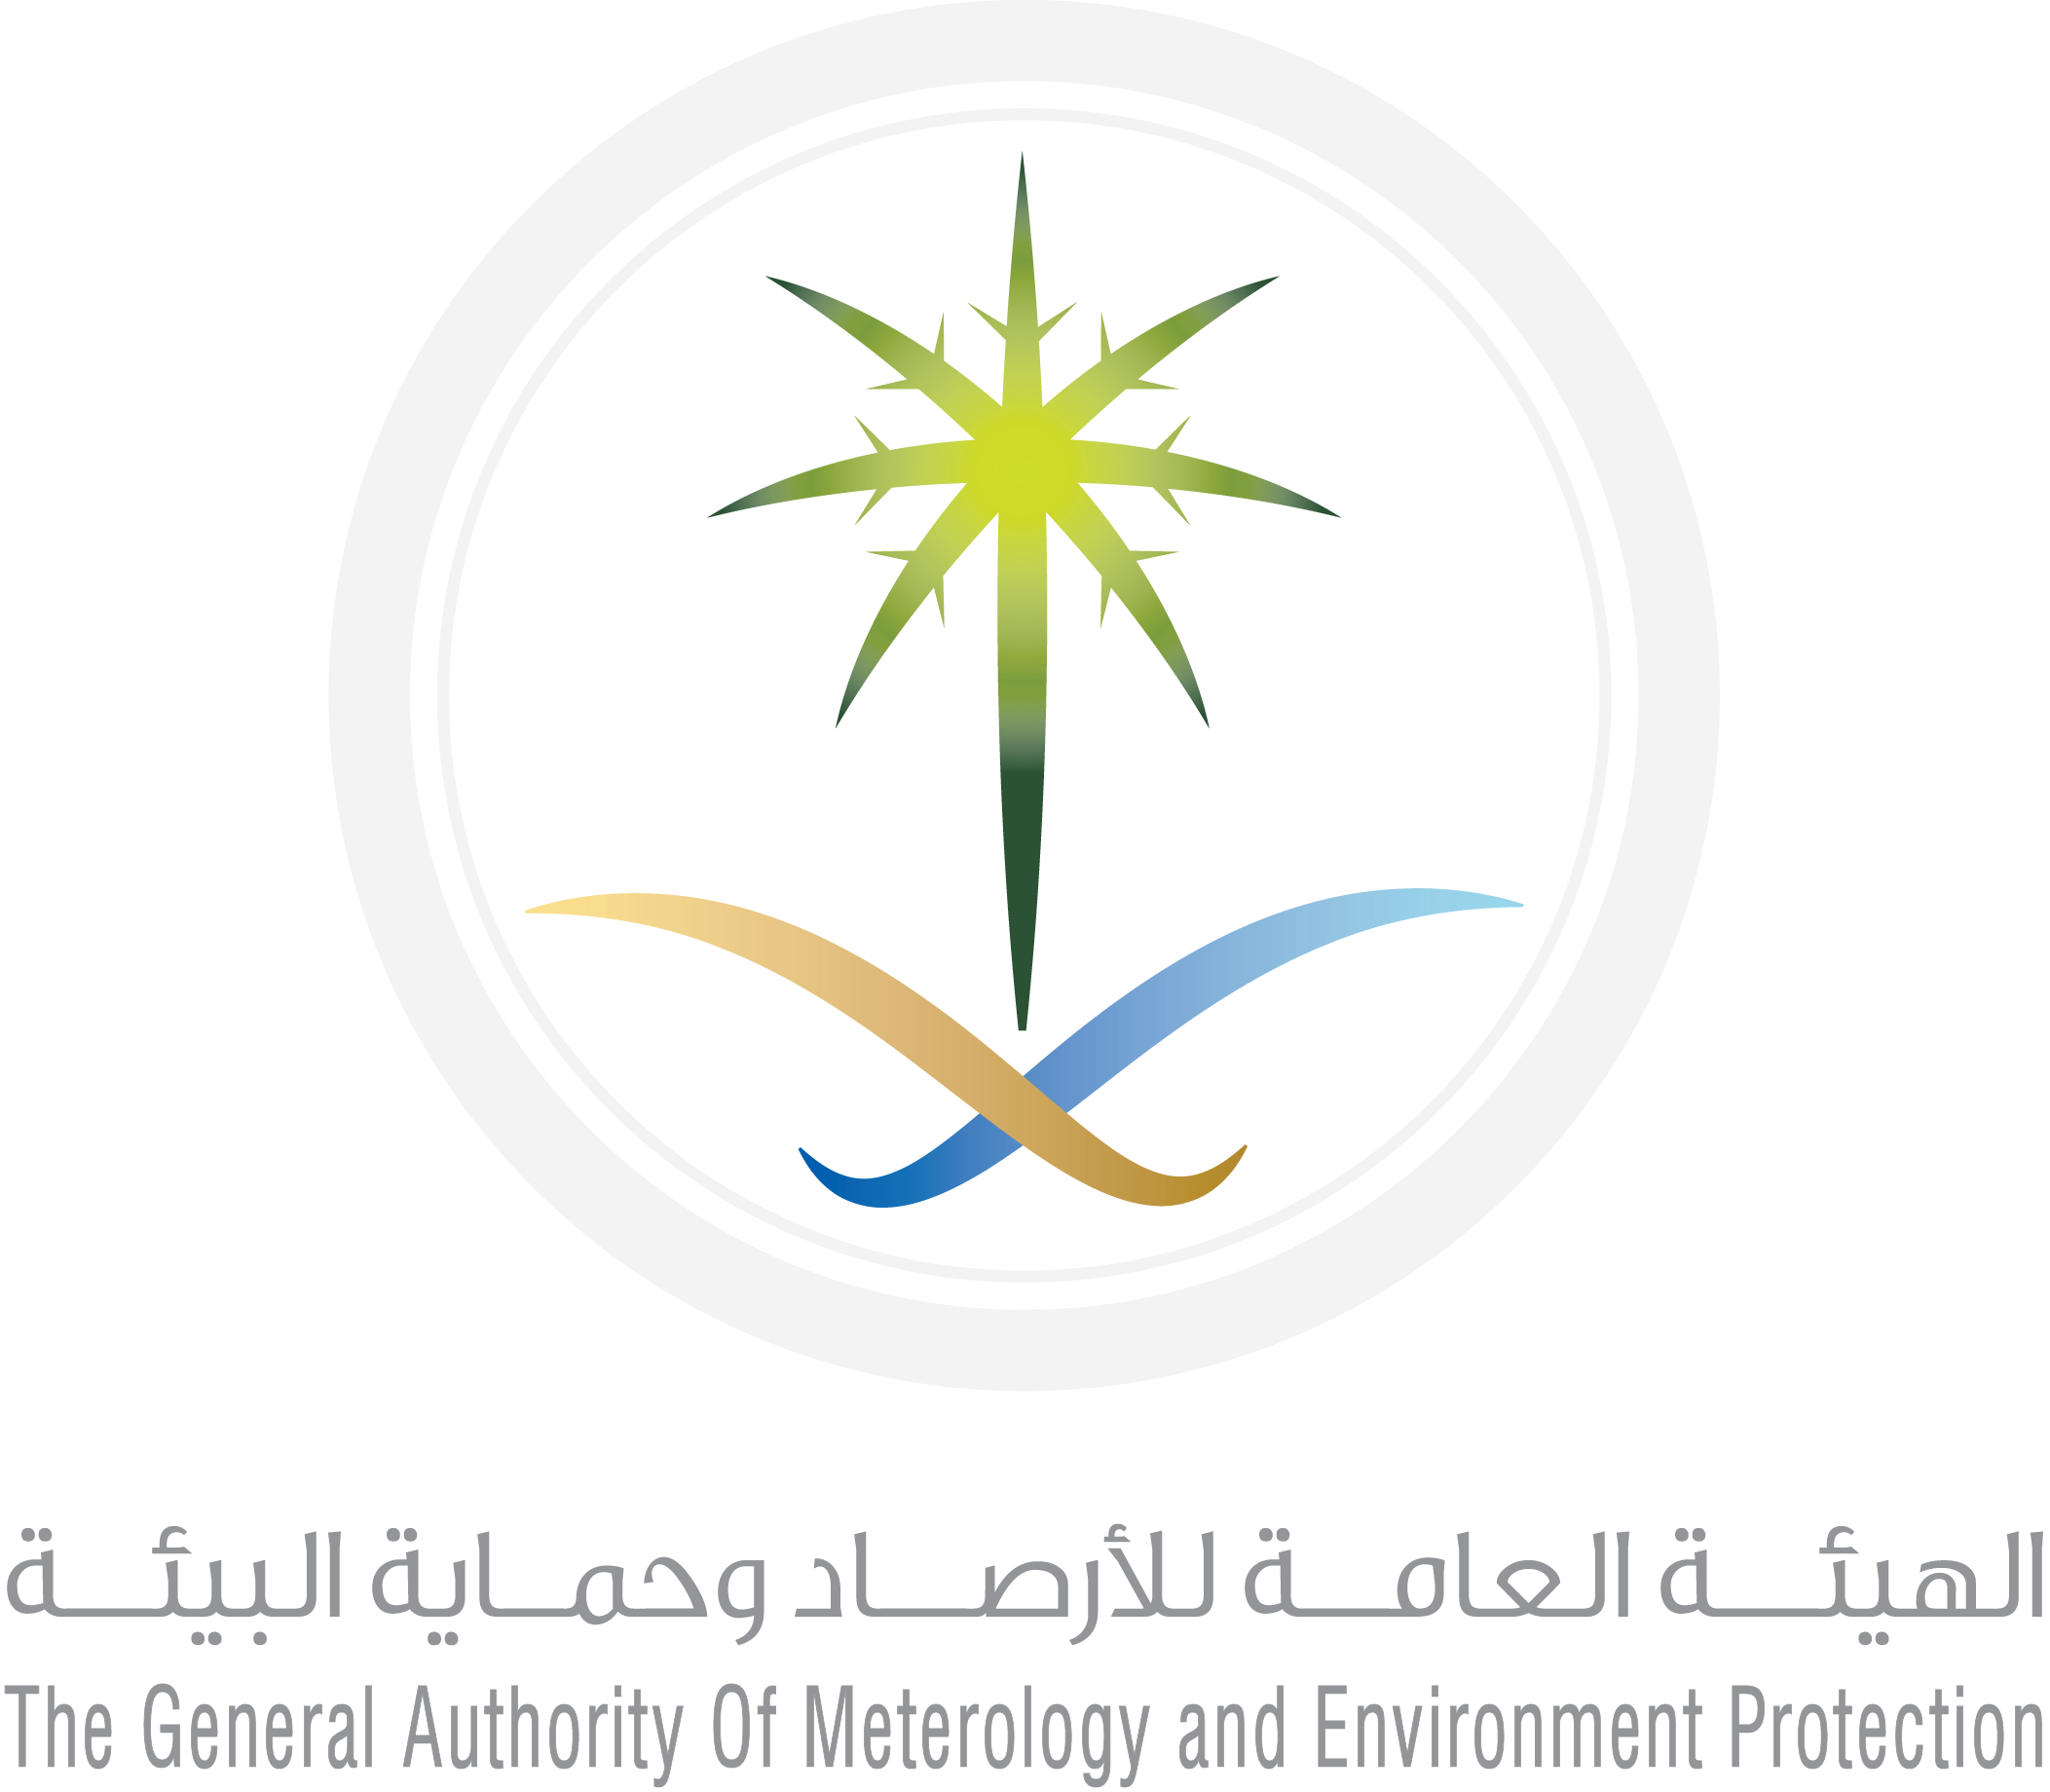 The General Authority of Meteorology and Environmental Protection